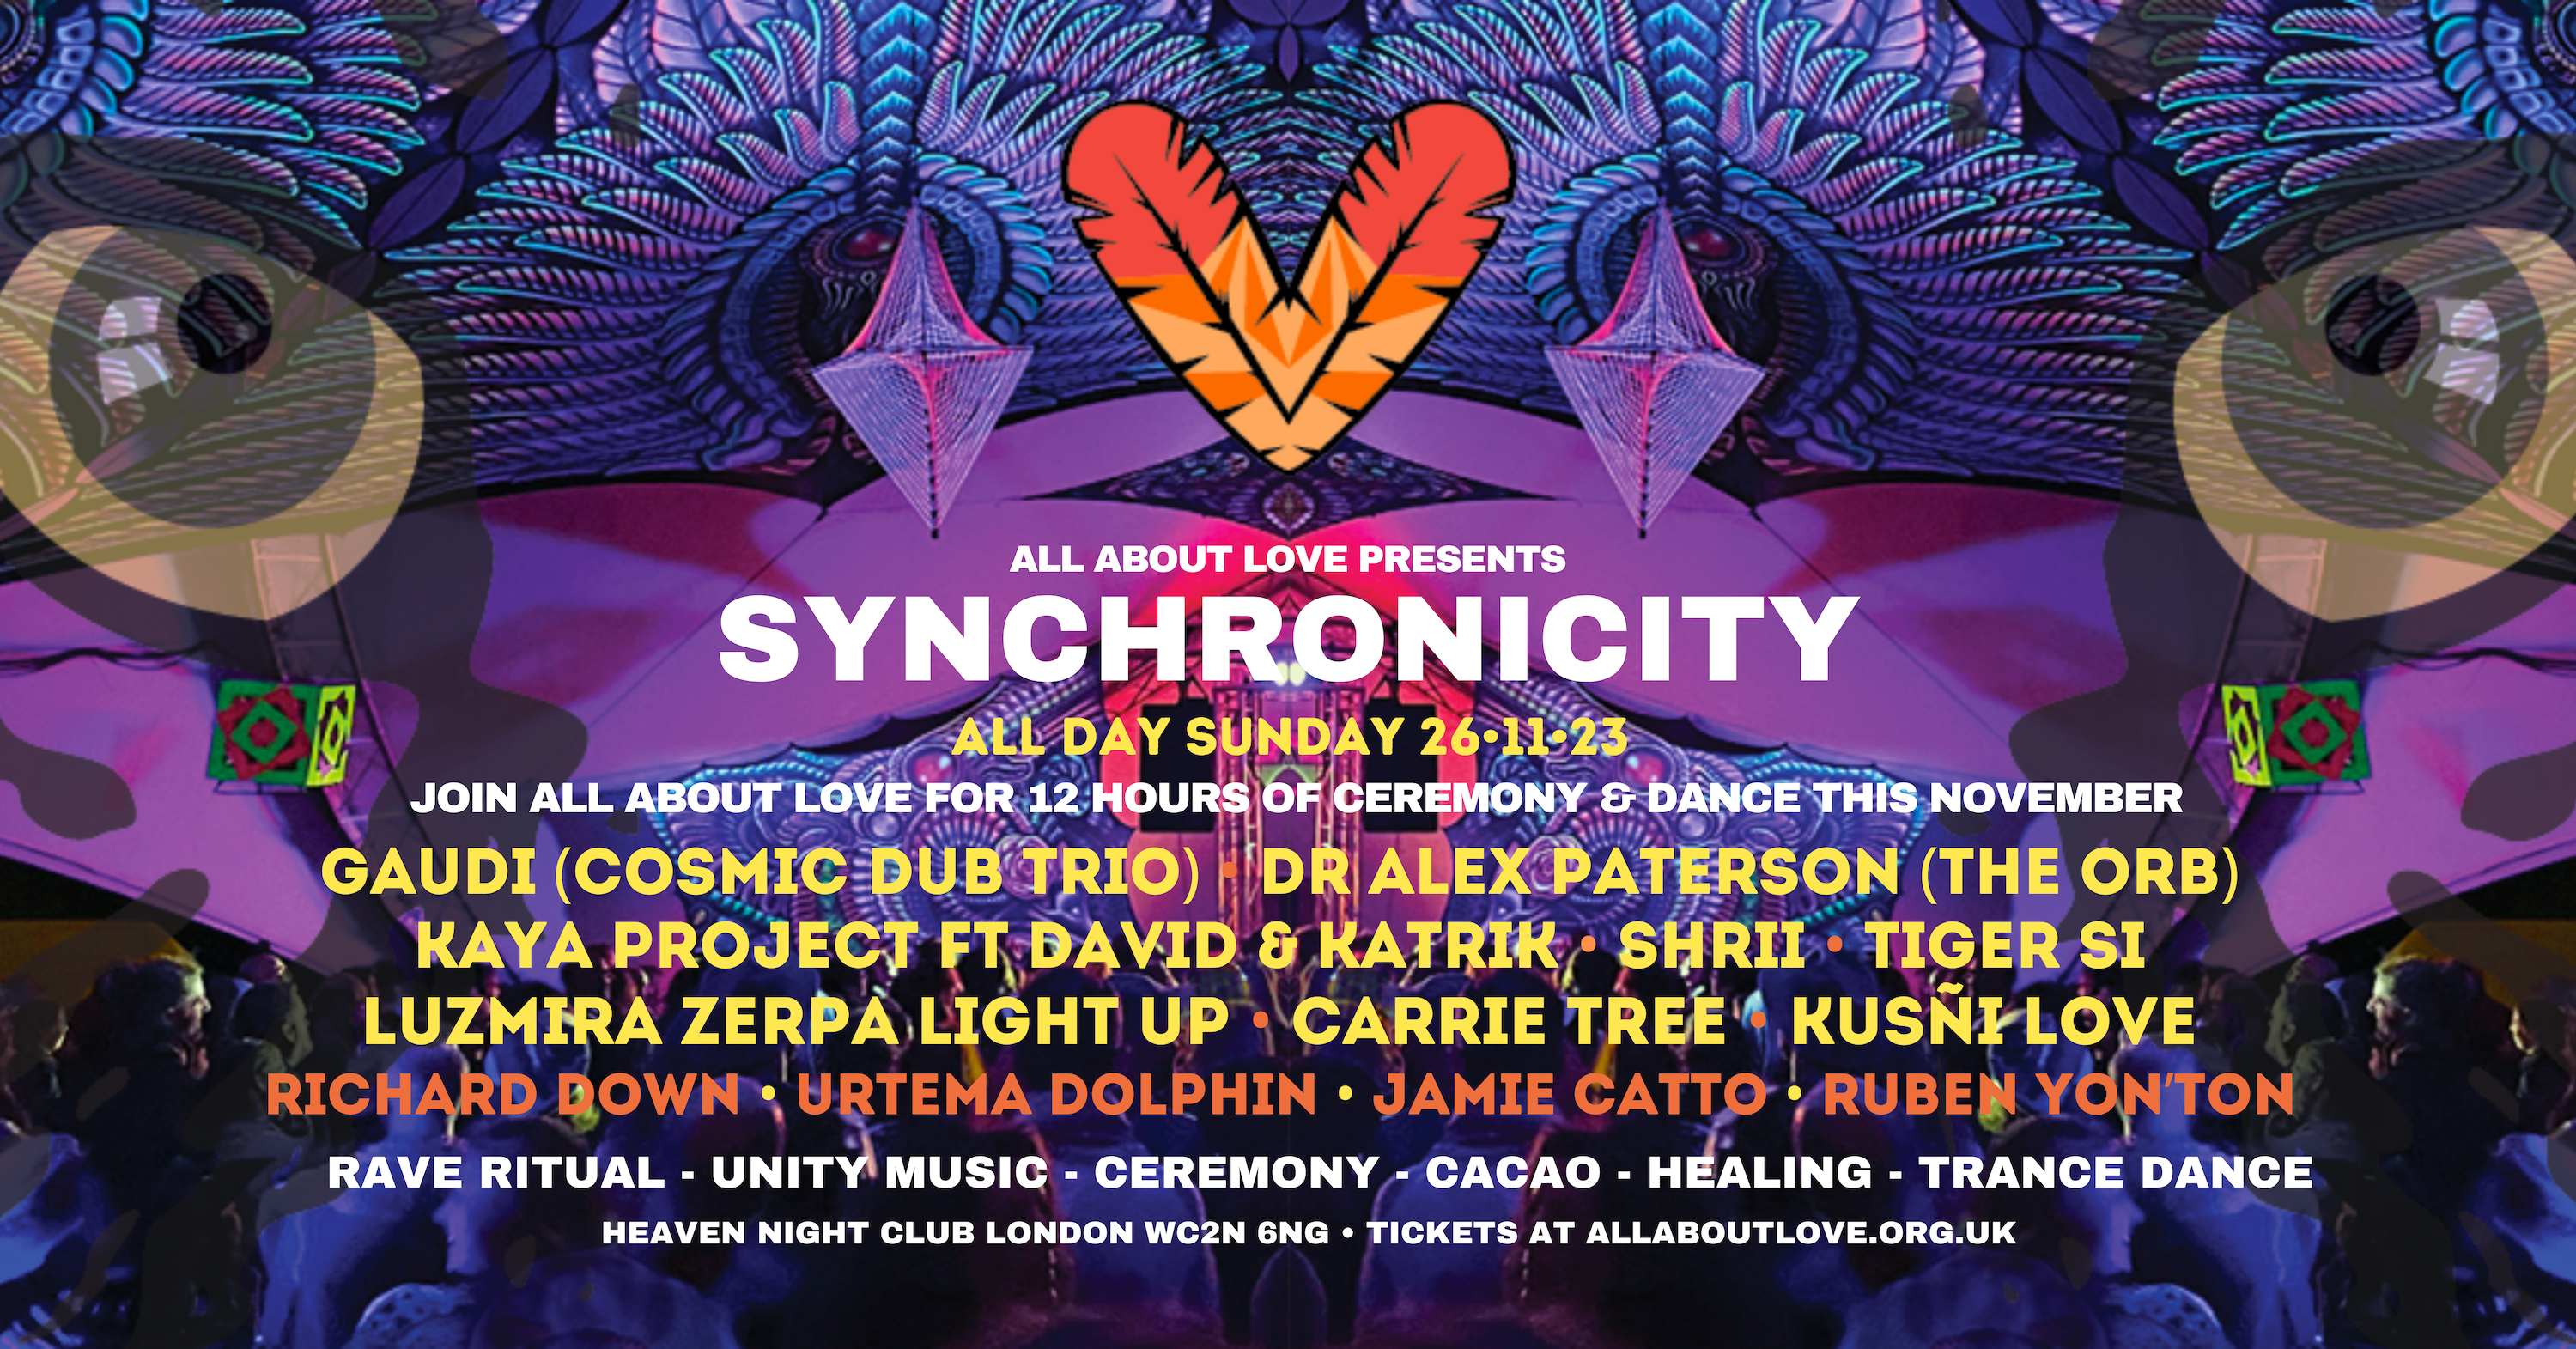 All About Love presents Synchronicity - Página frontal